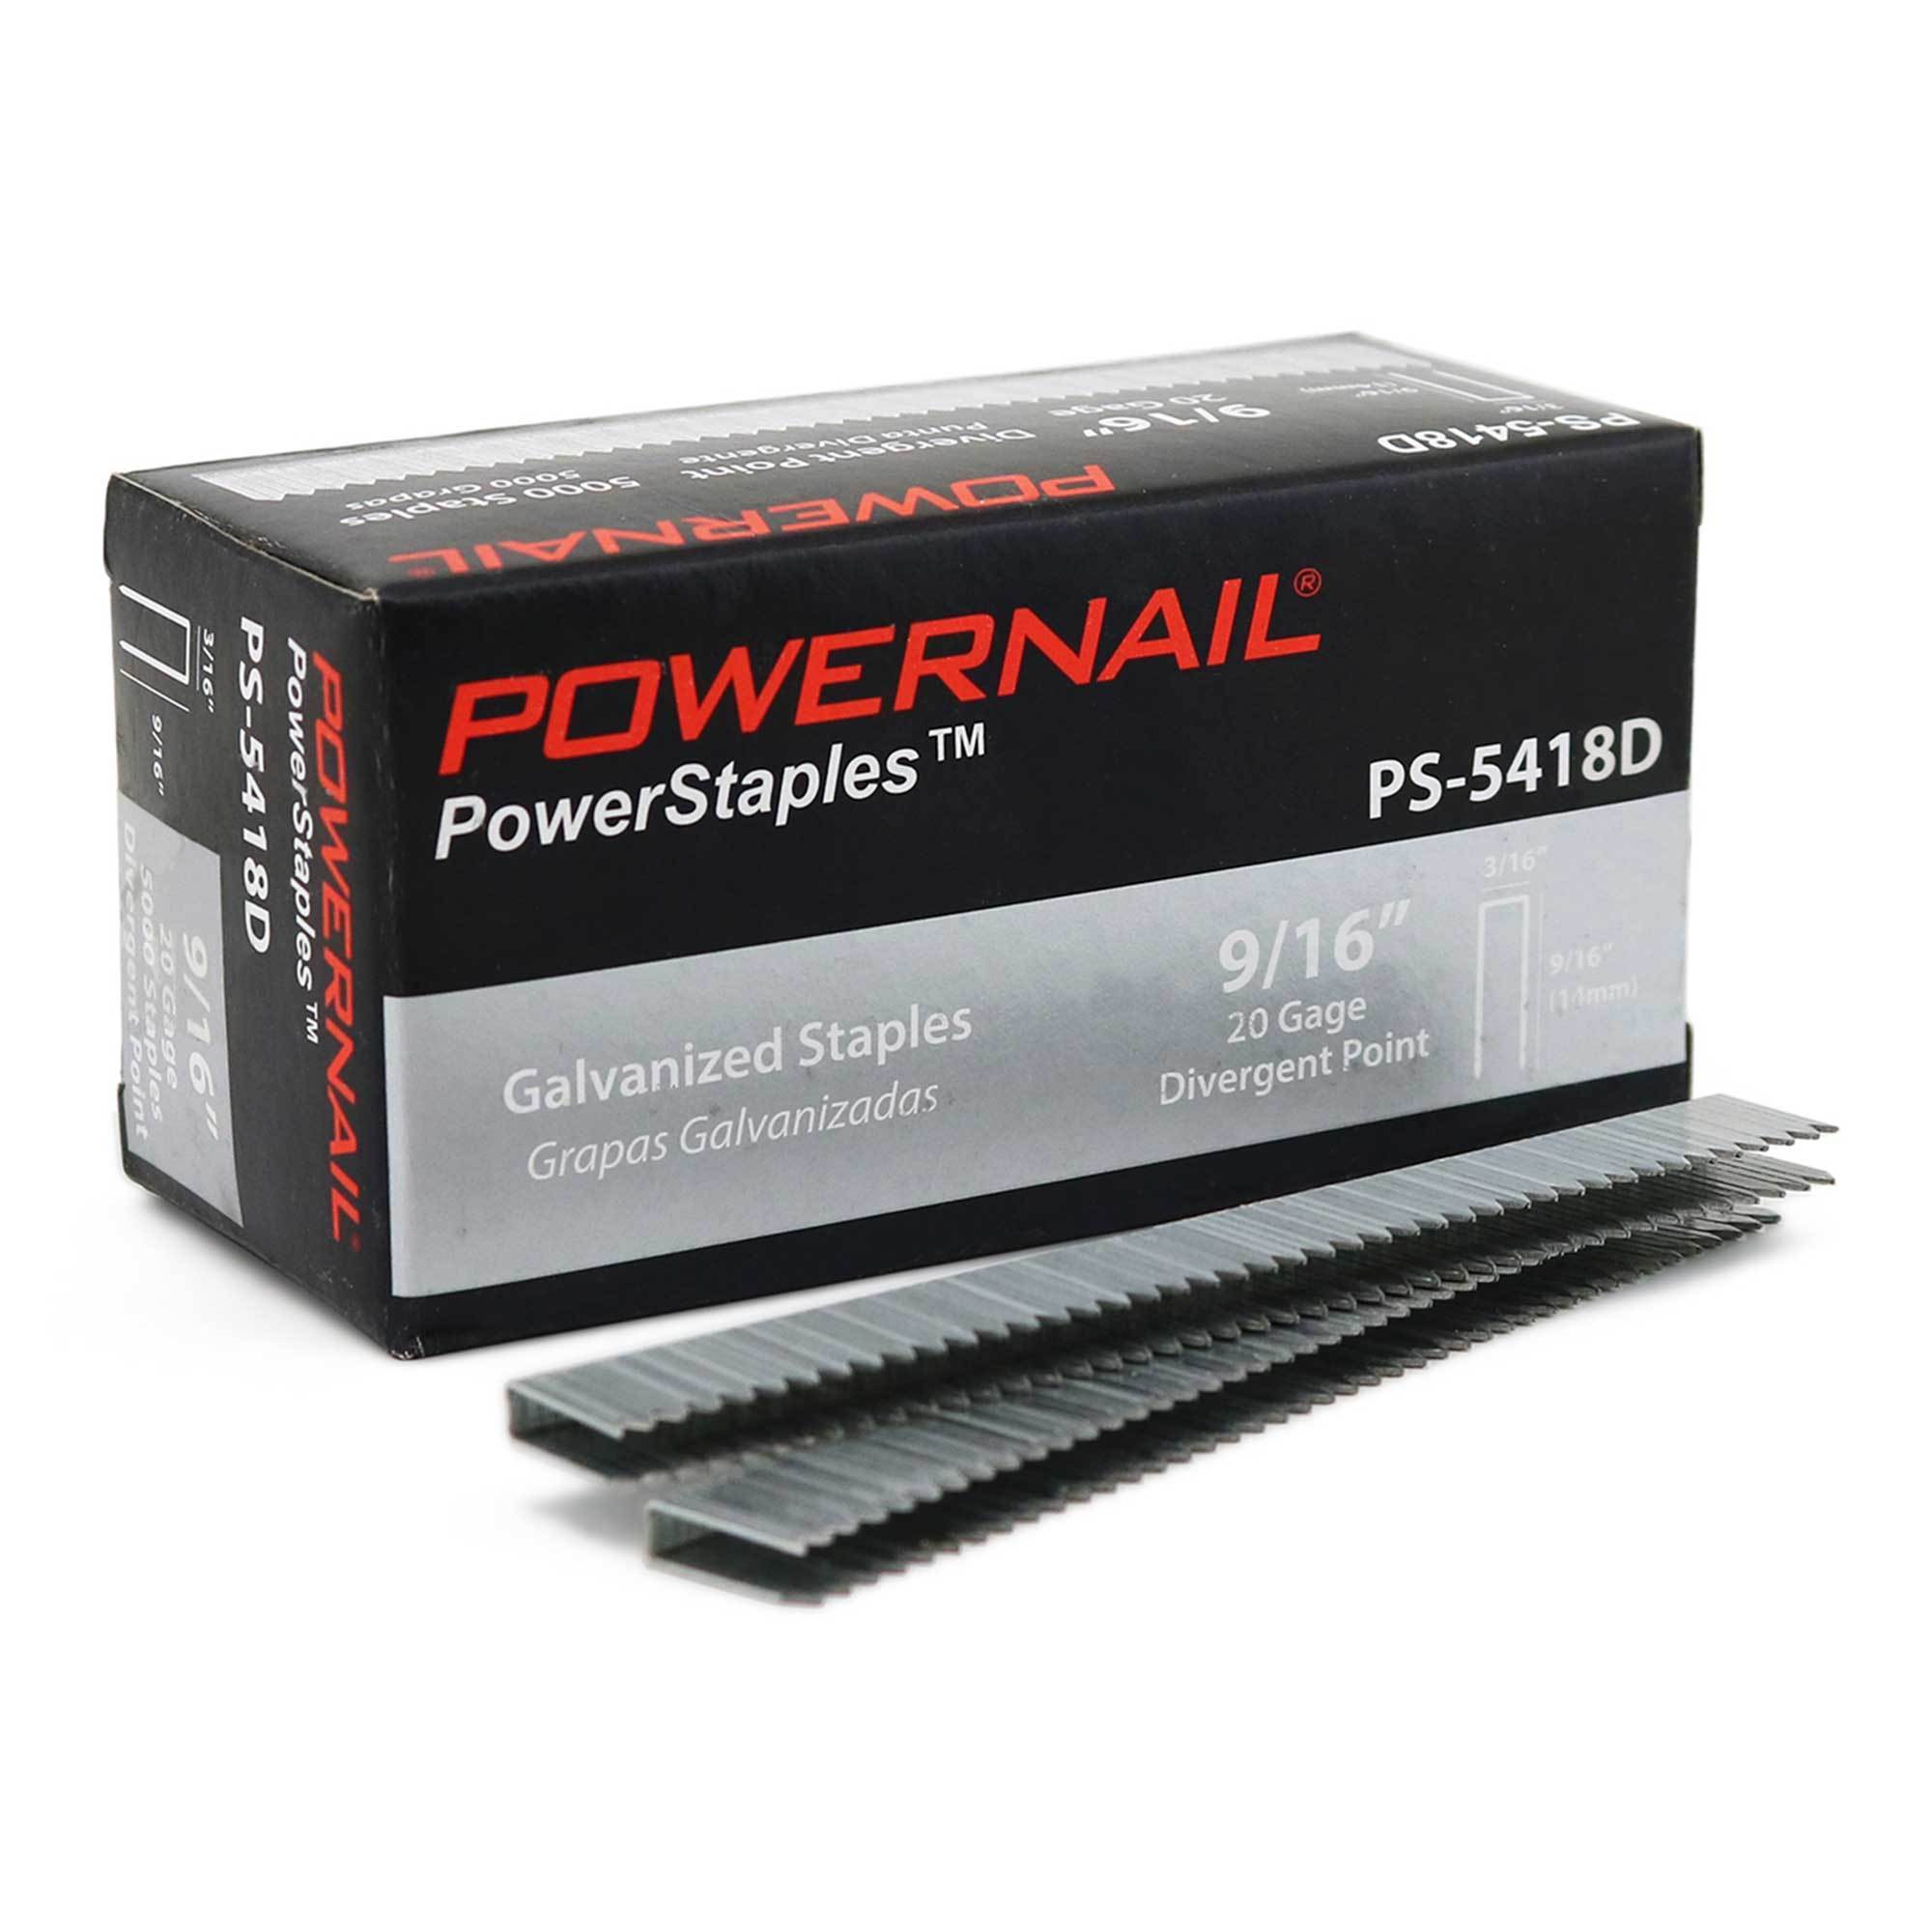 POWERNAIL, 3/16Inchx9/16Inch 20ga Staple Divergent Point 100,000ct, Fastener Size 0.19 in, Nail Gun Angle 0 Â°, Model PS5418D.PWR